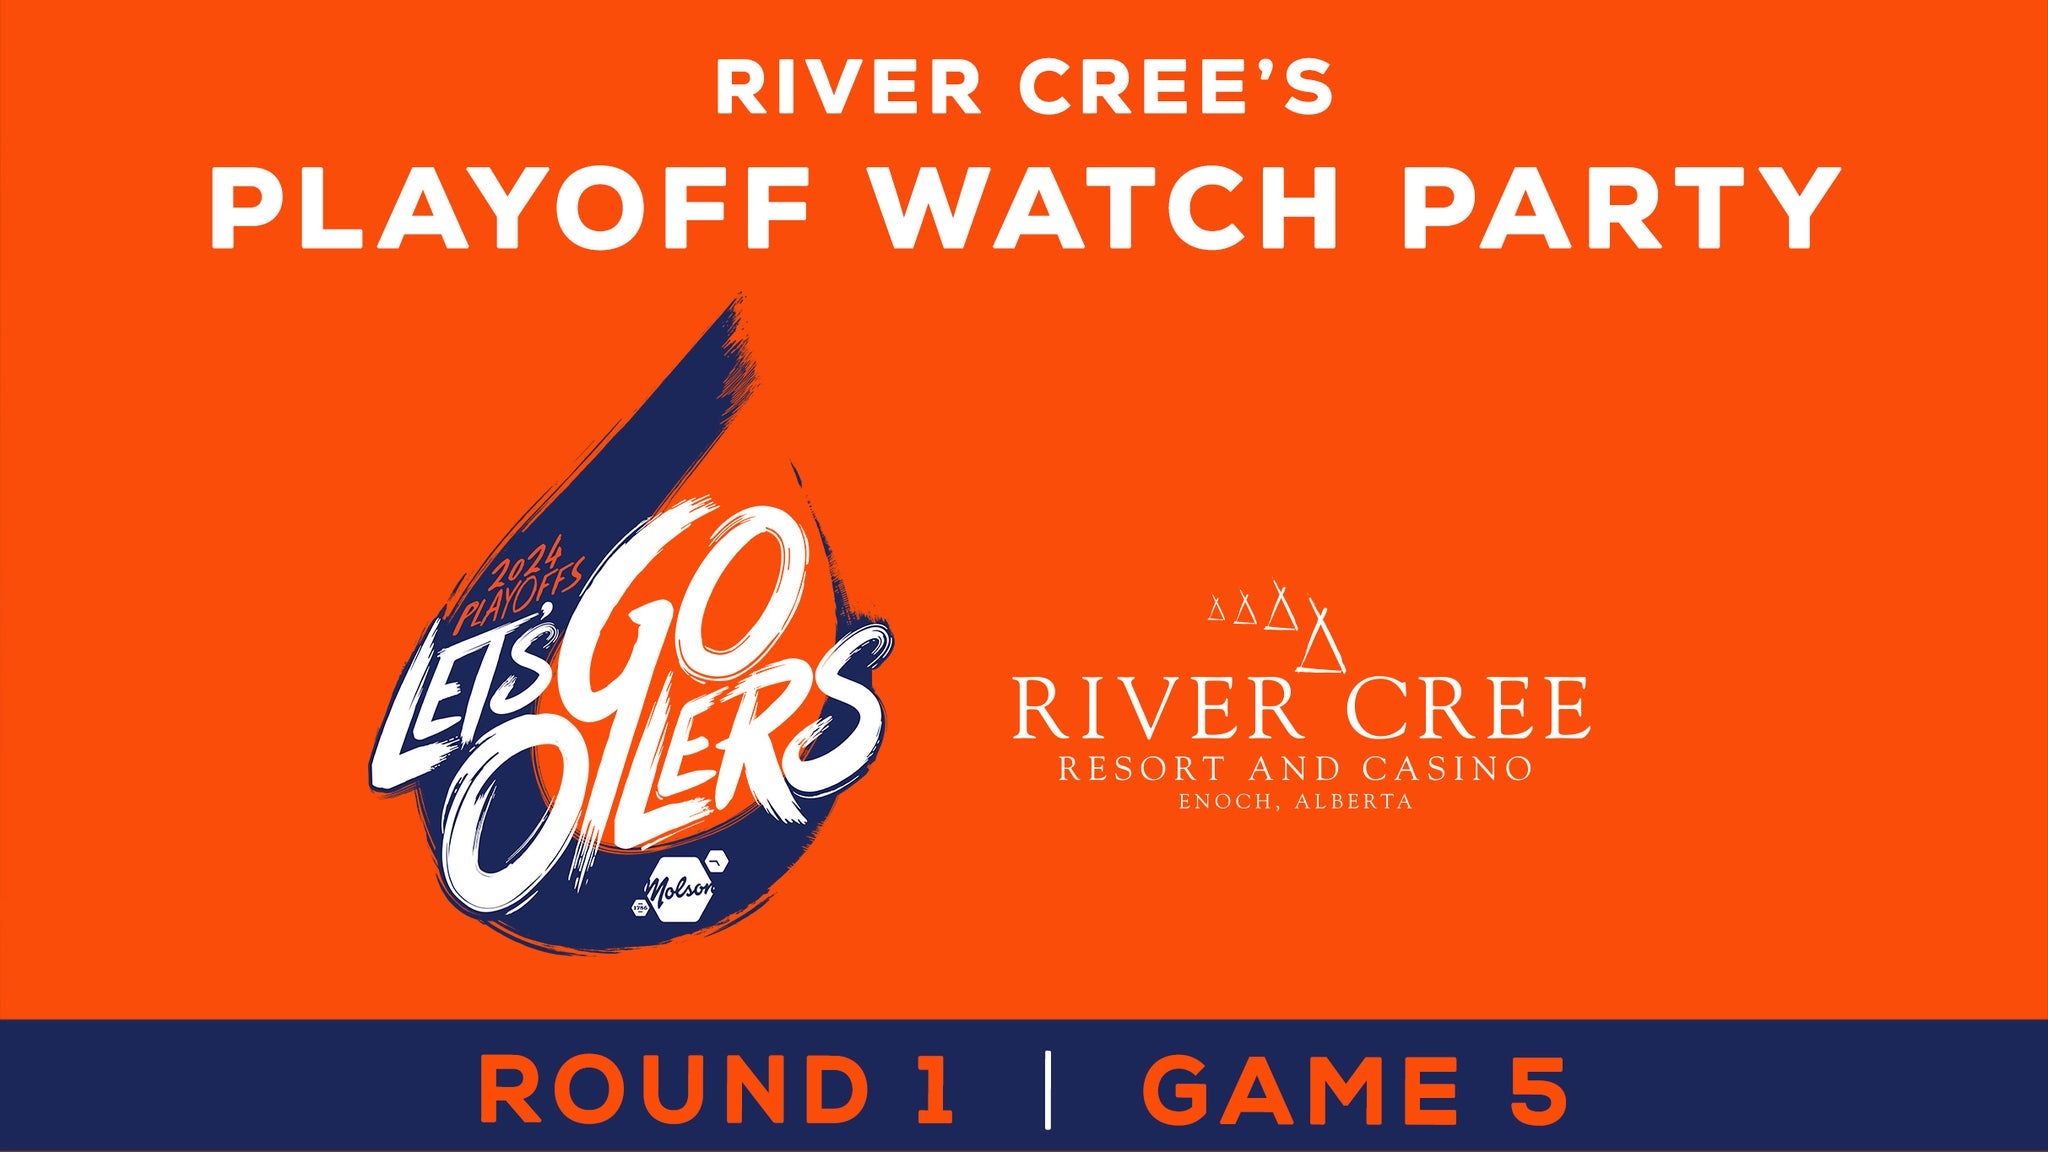 Oiler's Watch Party - Round 1 - Game 5 in Enoch promo photo for First Nation Discount-Status Card Holder presale offer code